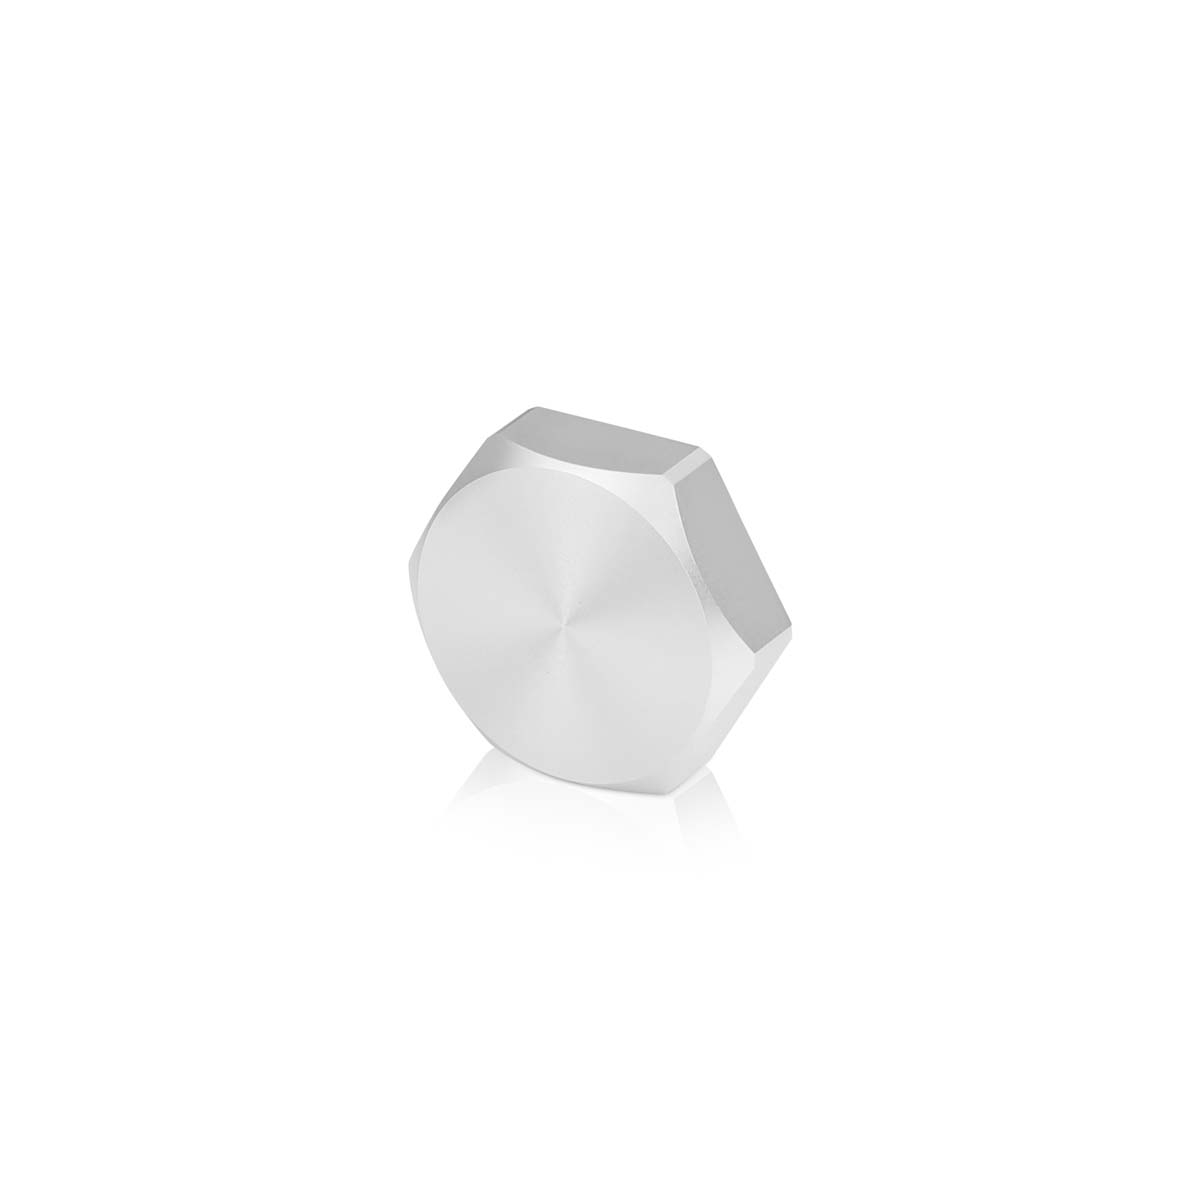 5/16-18 Threaded Hex 1-1/4'' Caps, Height: 3/8'', Clear Anodized Aluminum [Required Material Hole Size: 3/8'']